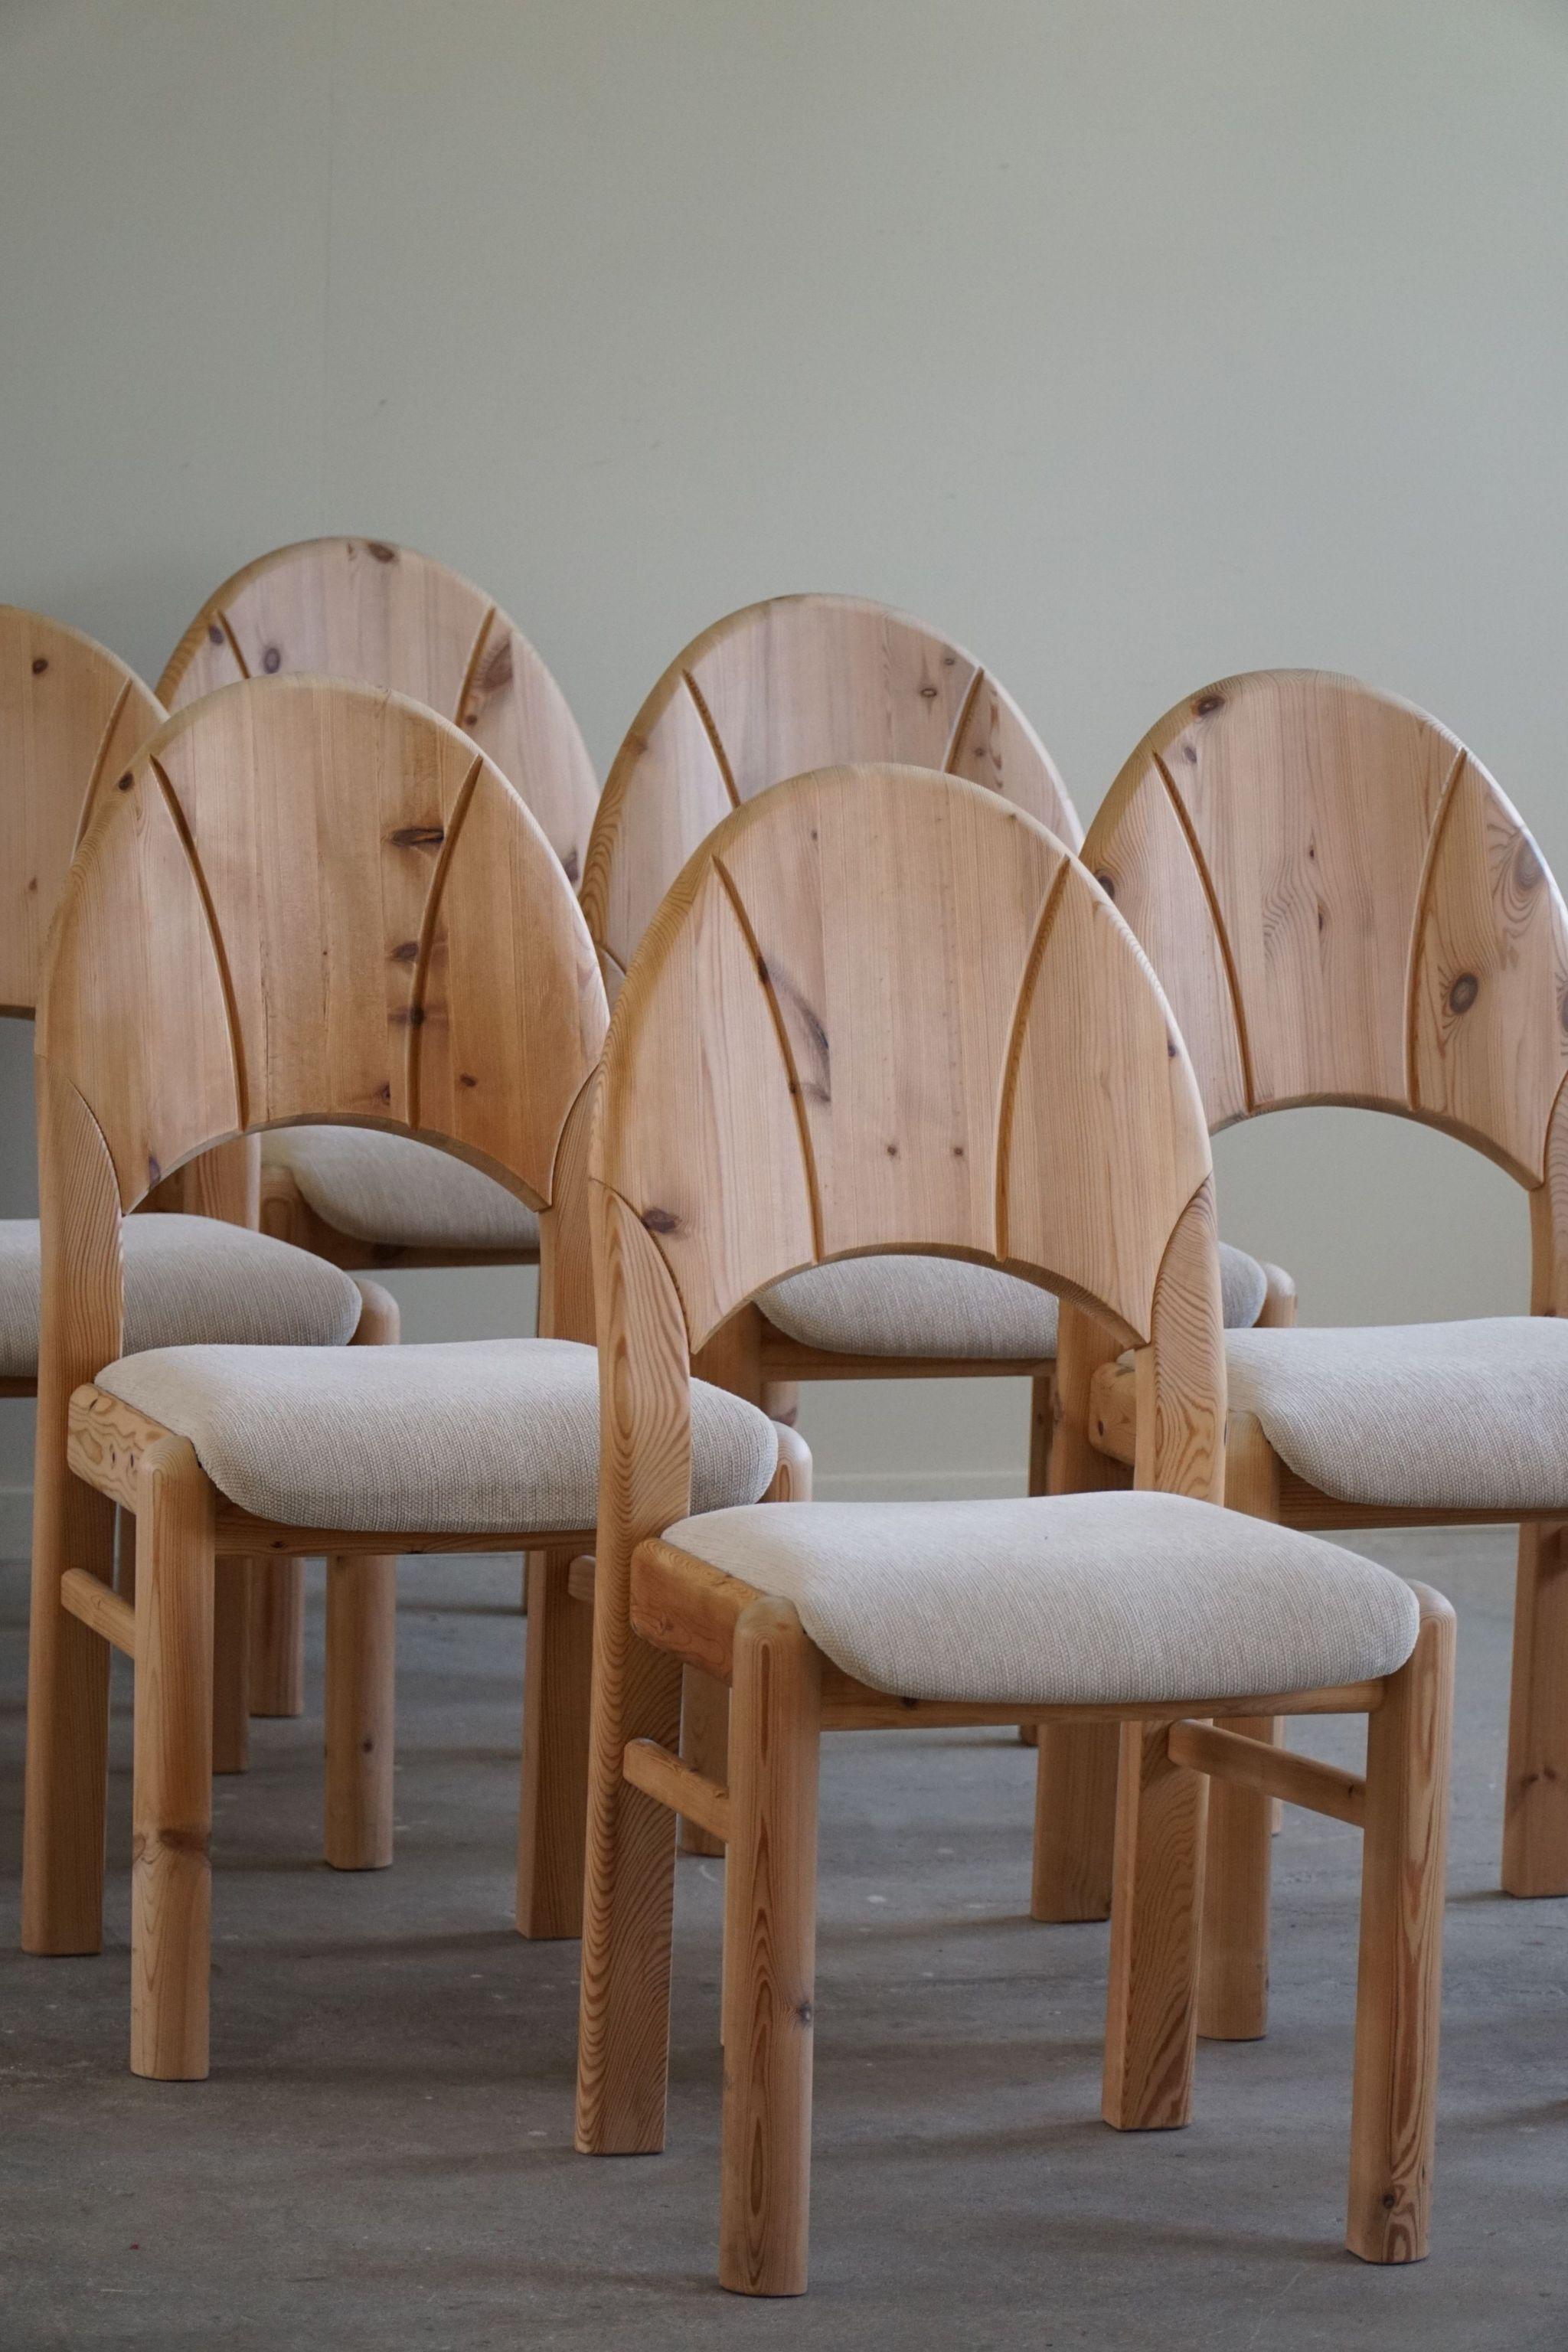 Set of 8 Sculptural Danish Modern Brutalist Chairs in Pine & Wool, 1970s For Sale 11